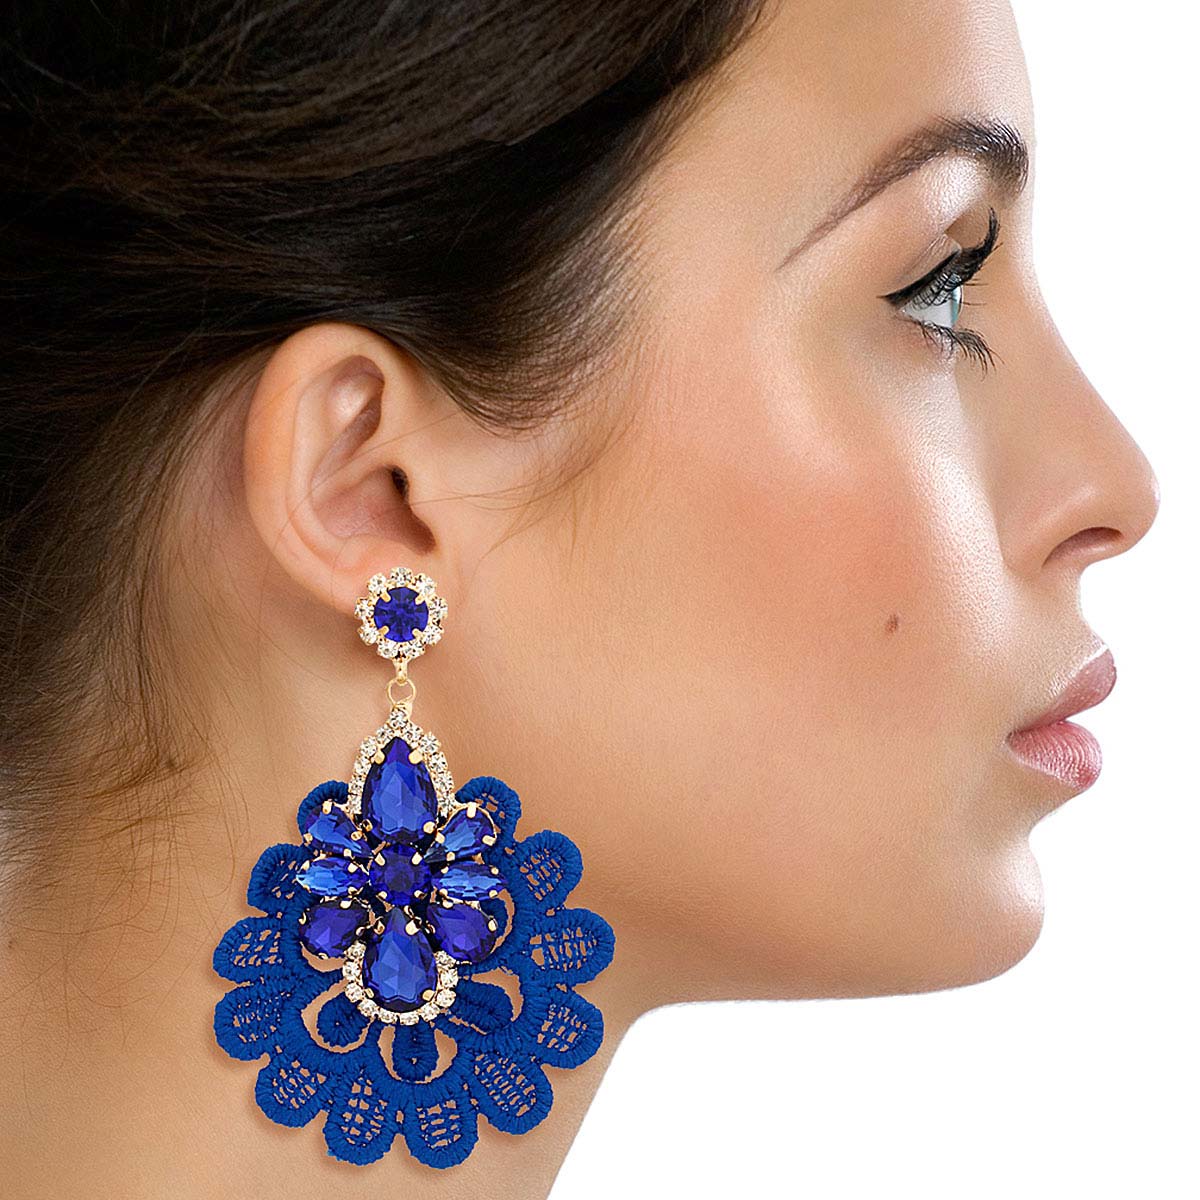 Royal Blue Fabric Lace Crystal Earrings